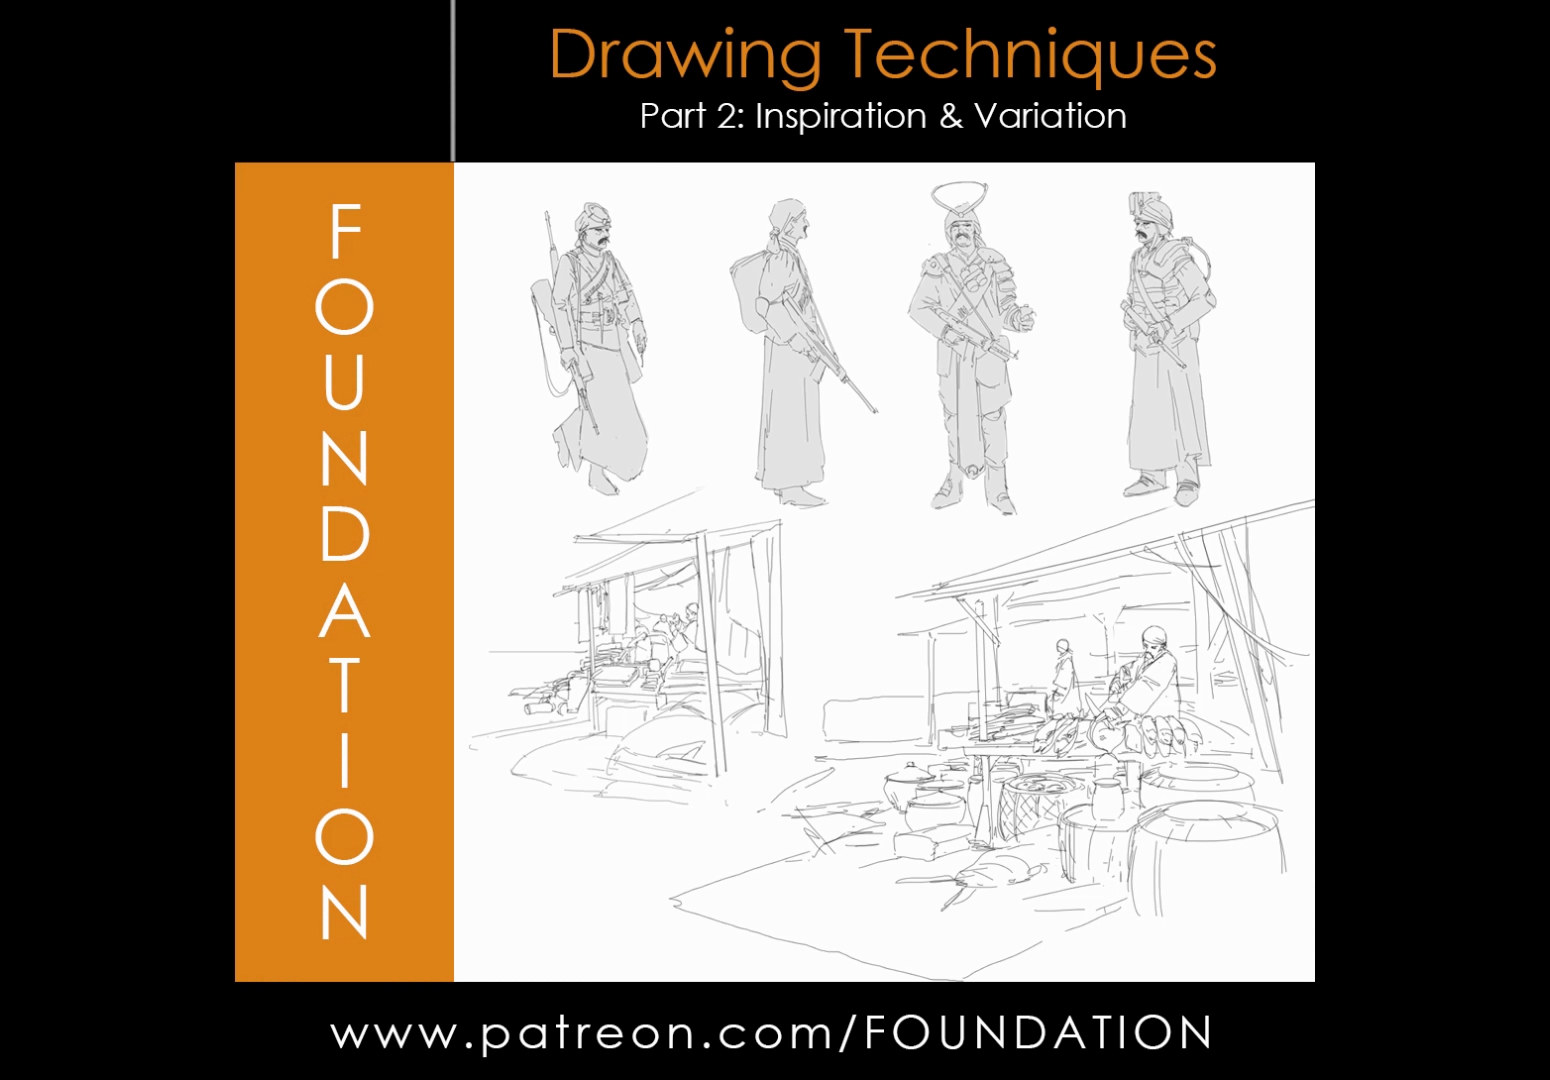 Drawing Techniques Part 2 – Inspiration & Variation